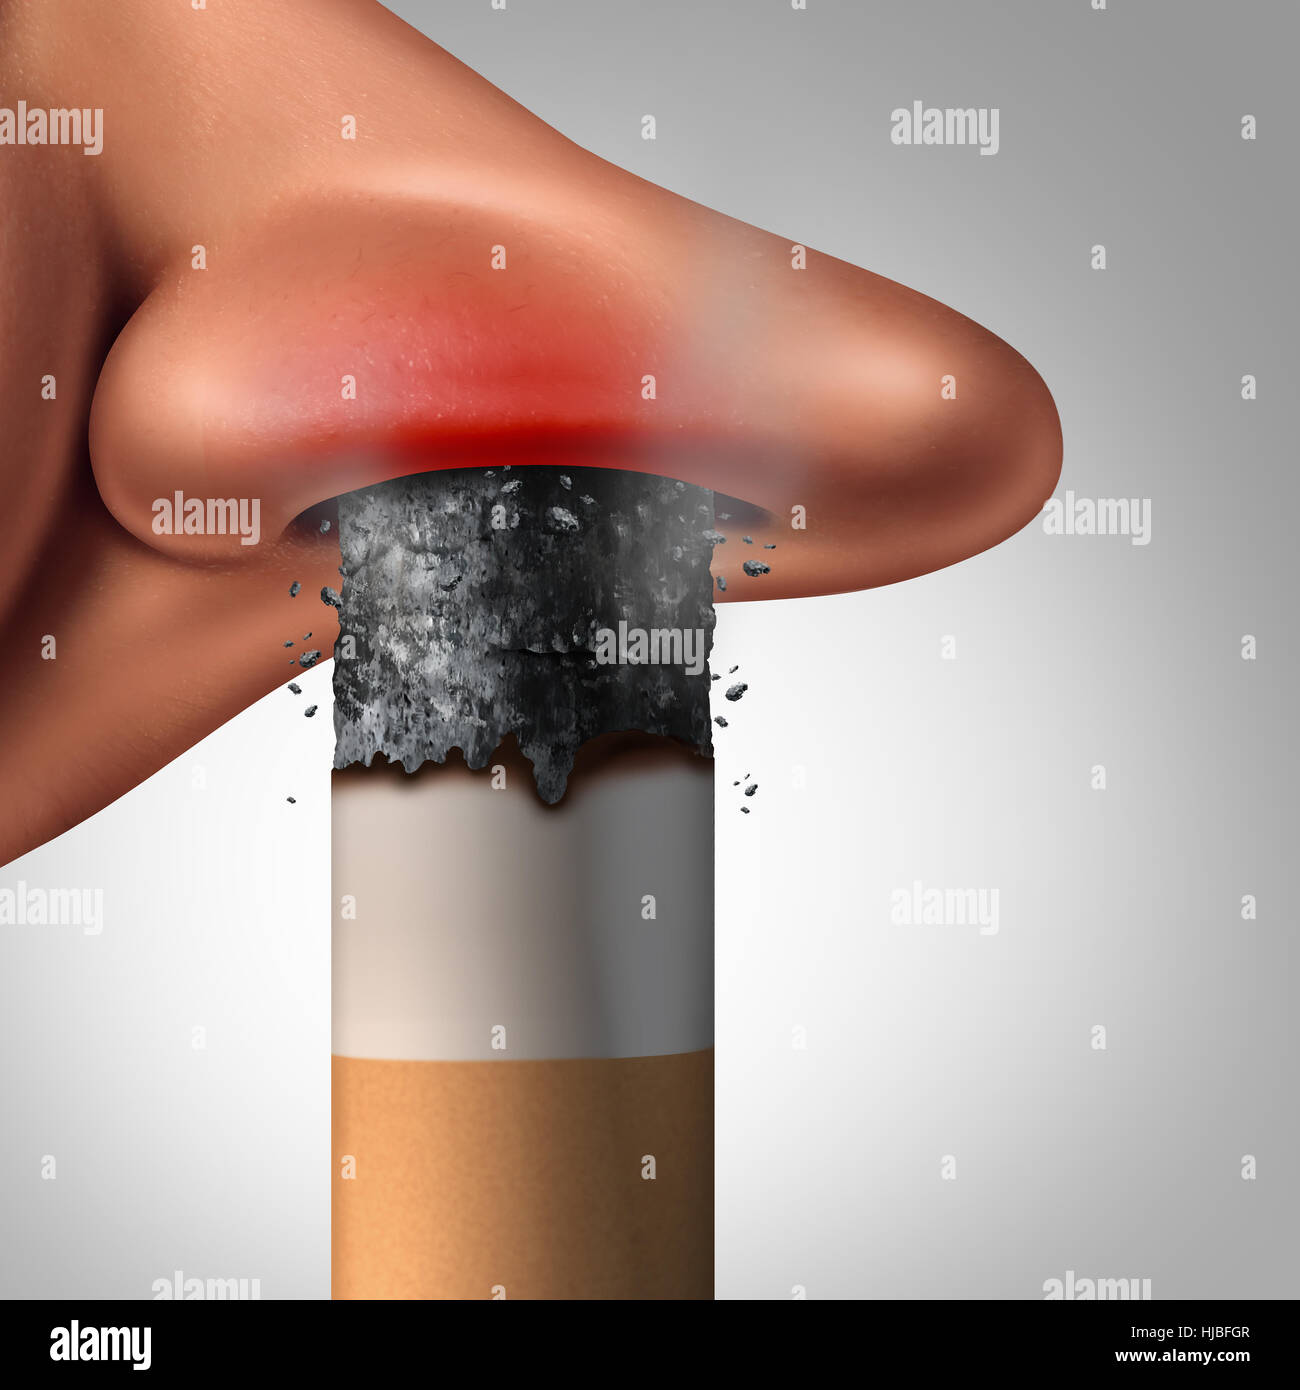 Breathing cigarette smoke and passive smoking health danger concept as a burning tobacco product inside the nostril of a human nose with 3D illustrati Stock Photo